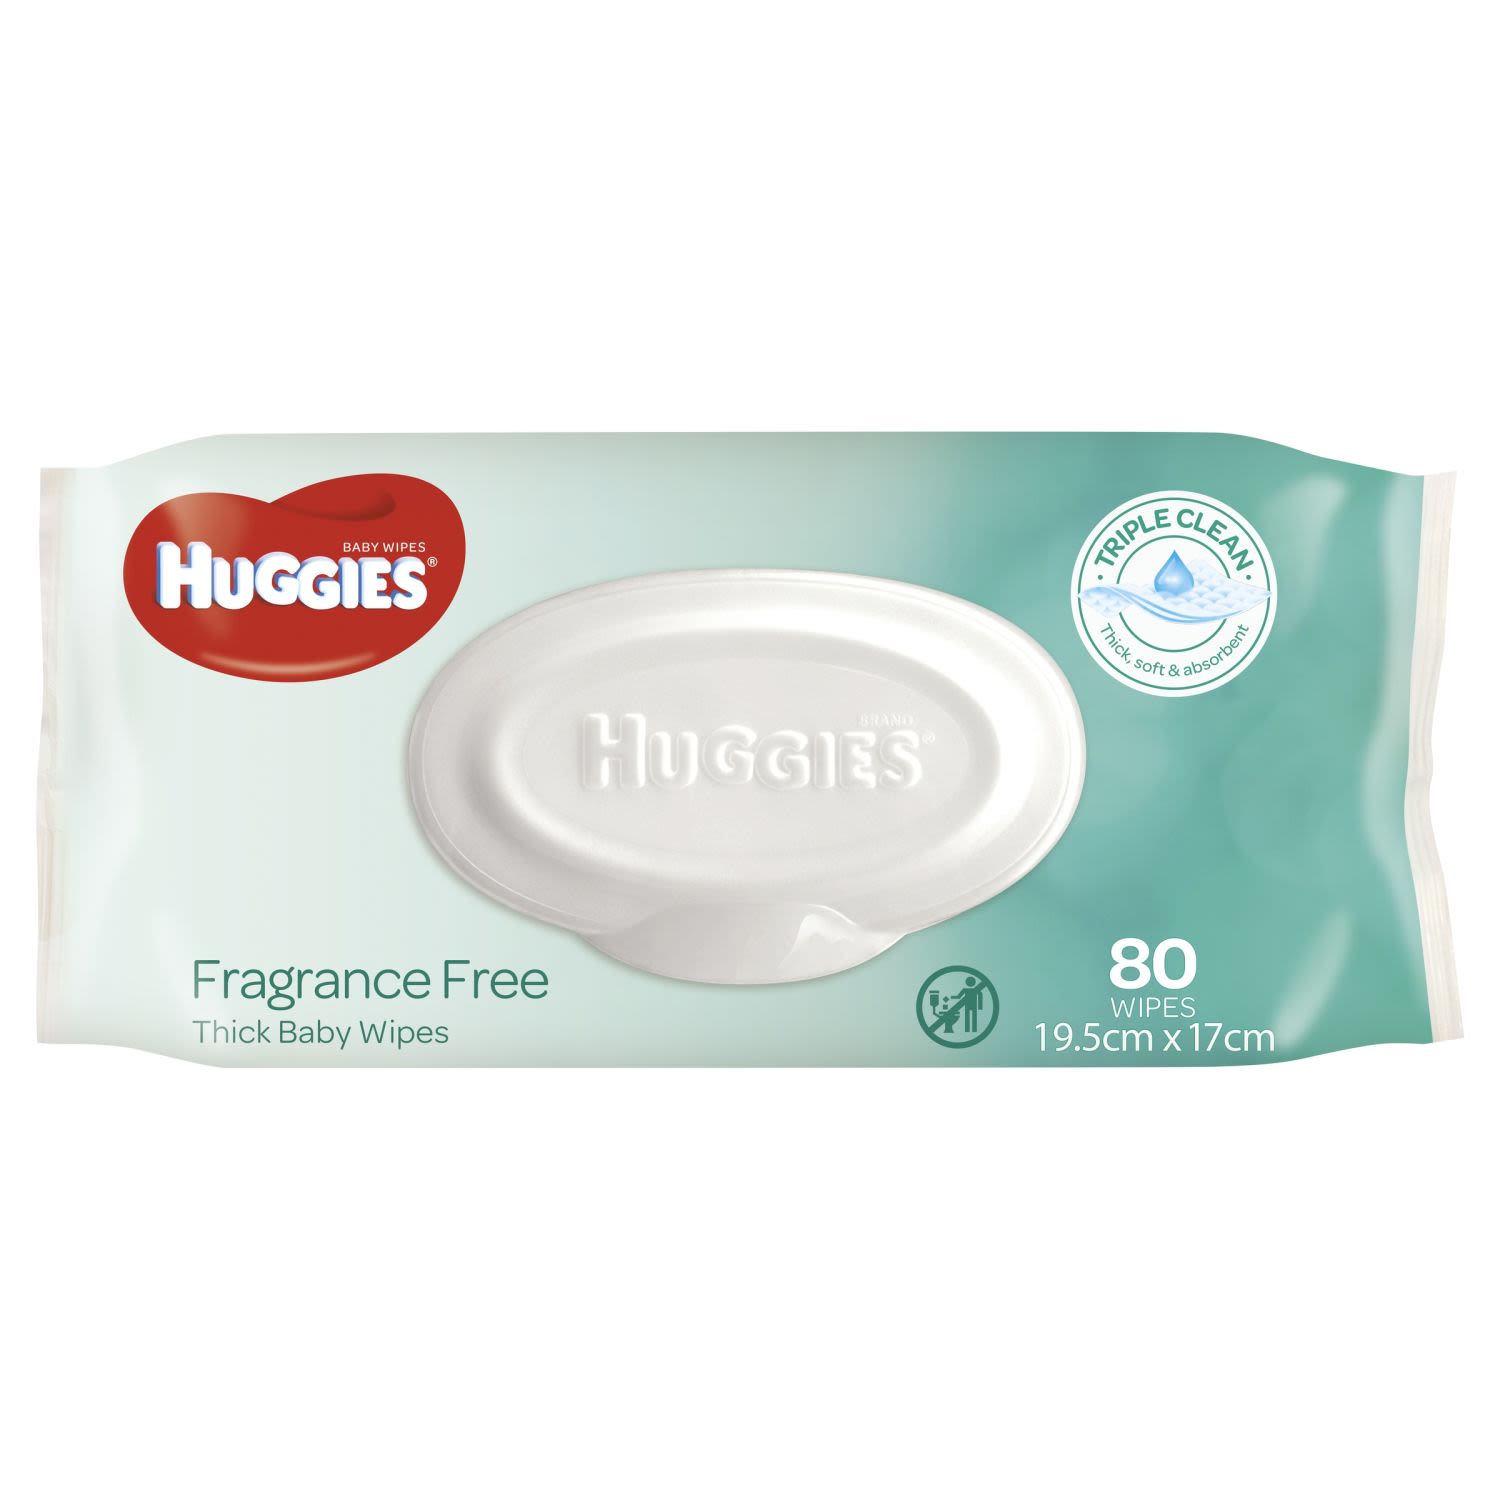 Huggies Fragrance Free Thick Baby Wipes contain Triple Clean Technology to provide the ultimate combination of thickness, softness and absorbency for clean, healthy skin.
- Triple Clean: Thick, soft & absorbent.
- Endorsed by Australian College of Midwives.
- Alcohol-Free (Means Ethanol & Isopropanol).
- Enriched with Aloe Vera and Vitamin E.
- Hypo-allergenic, free from soap, paraben and MI.
- Helps protect against nappy rash.<br /> <br />